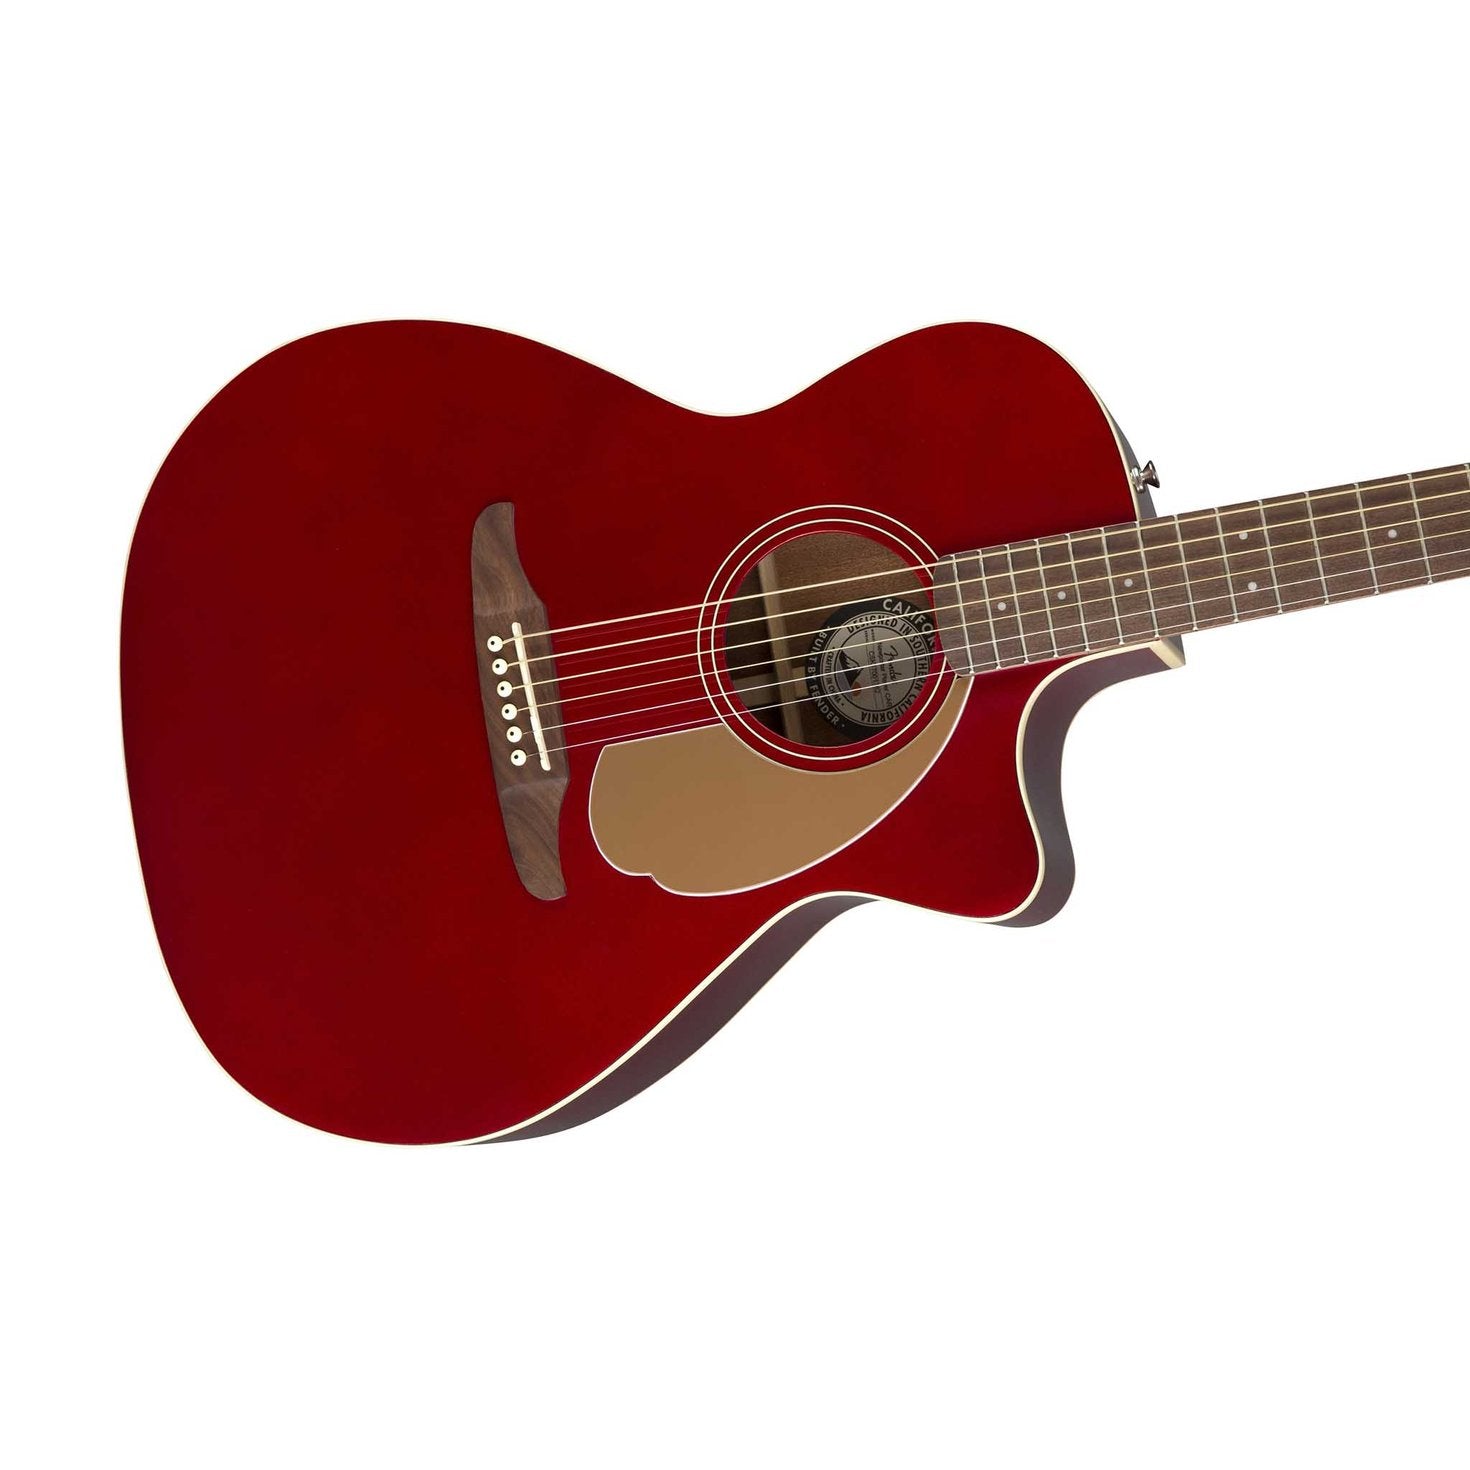 Fender Newporter Player Medium-Sized Acoustic Guitar, Candy Apple Red, FENDER, ACOUSTIC GUITAR, fender-acoustic-guitar-f03-097-0743-009, ZOSO MUSIC SDN BHD